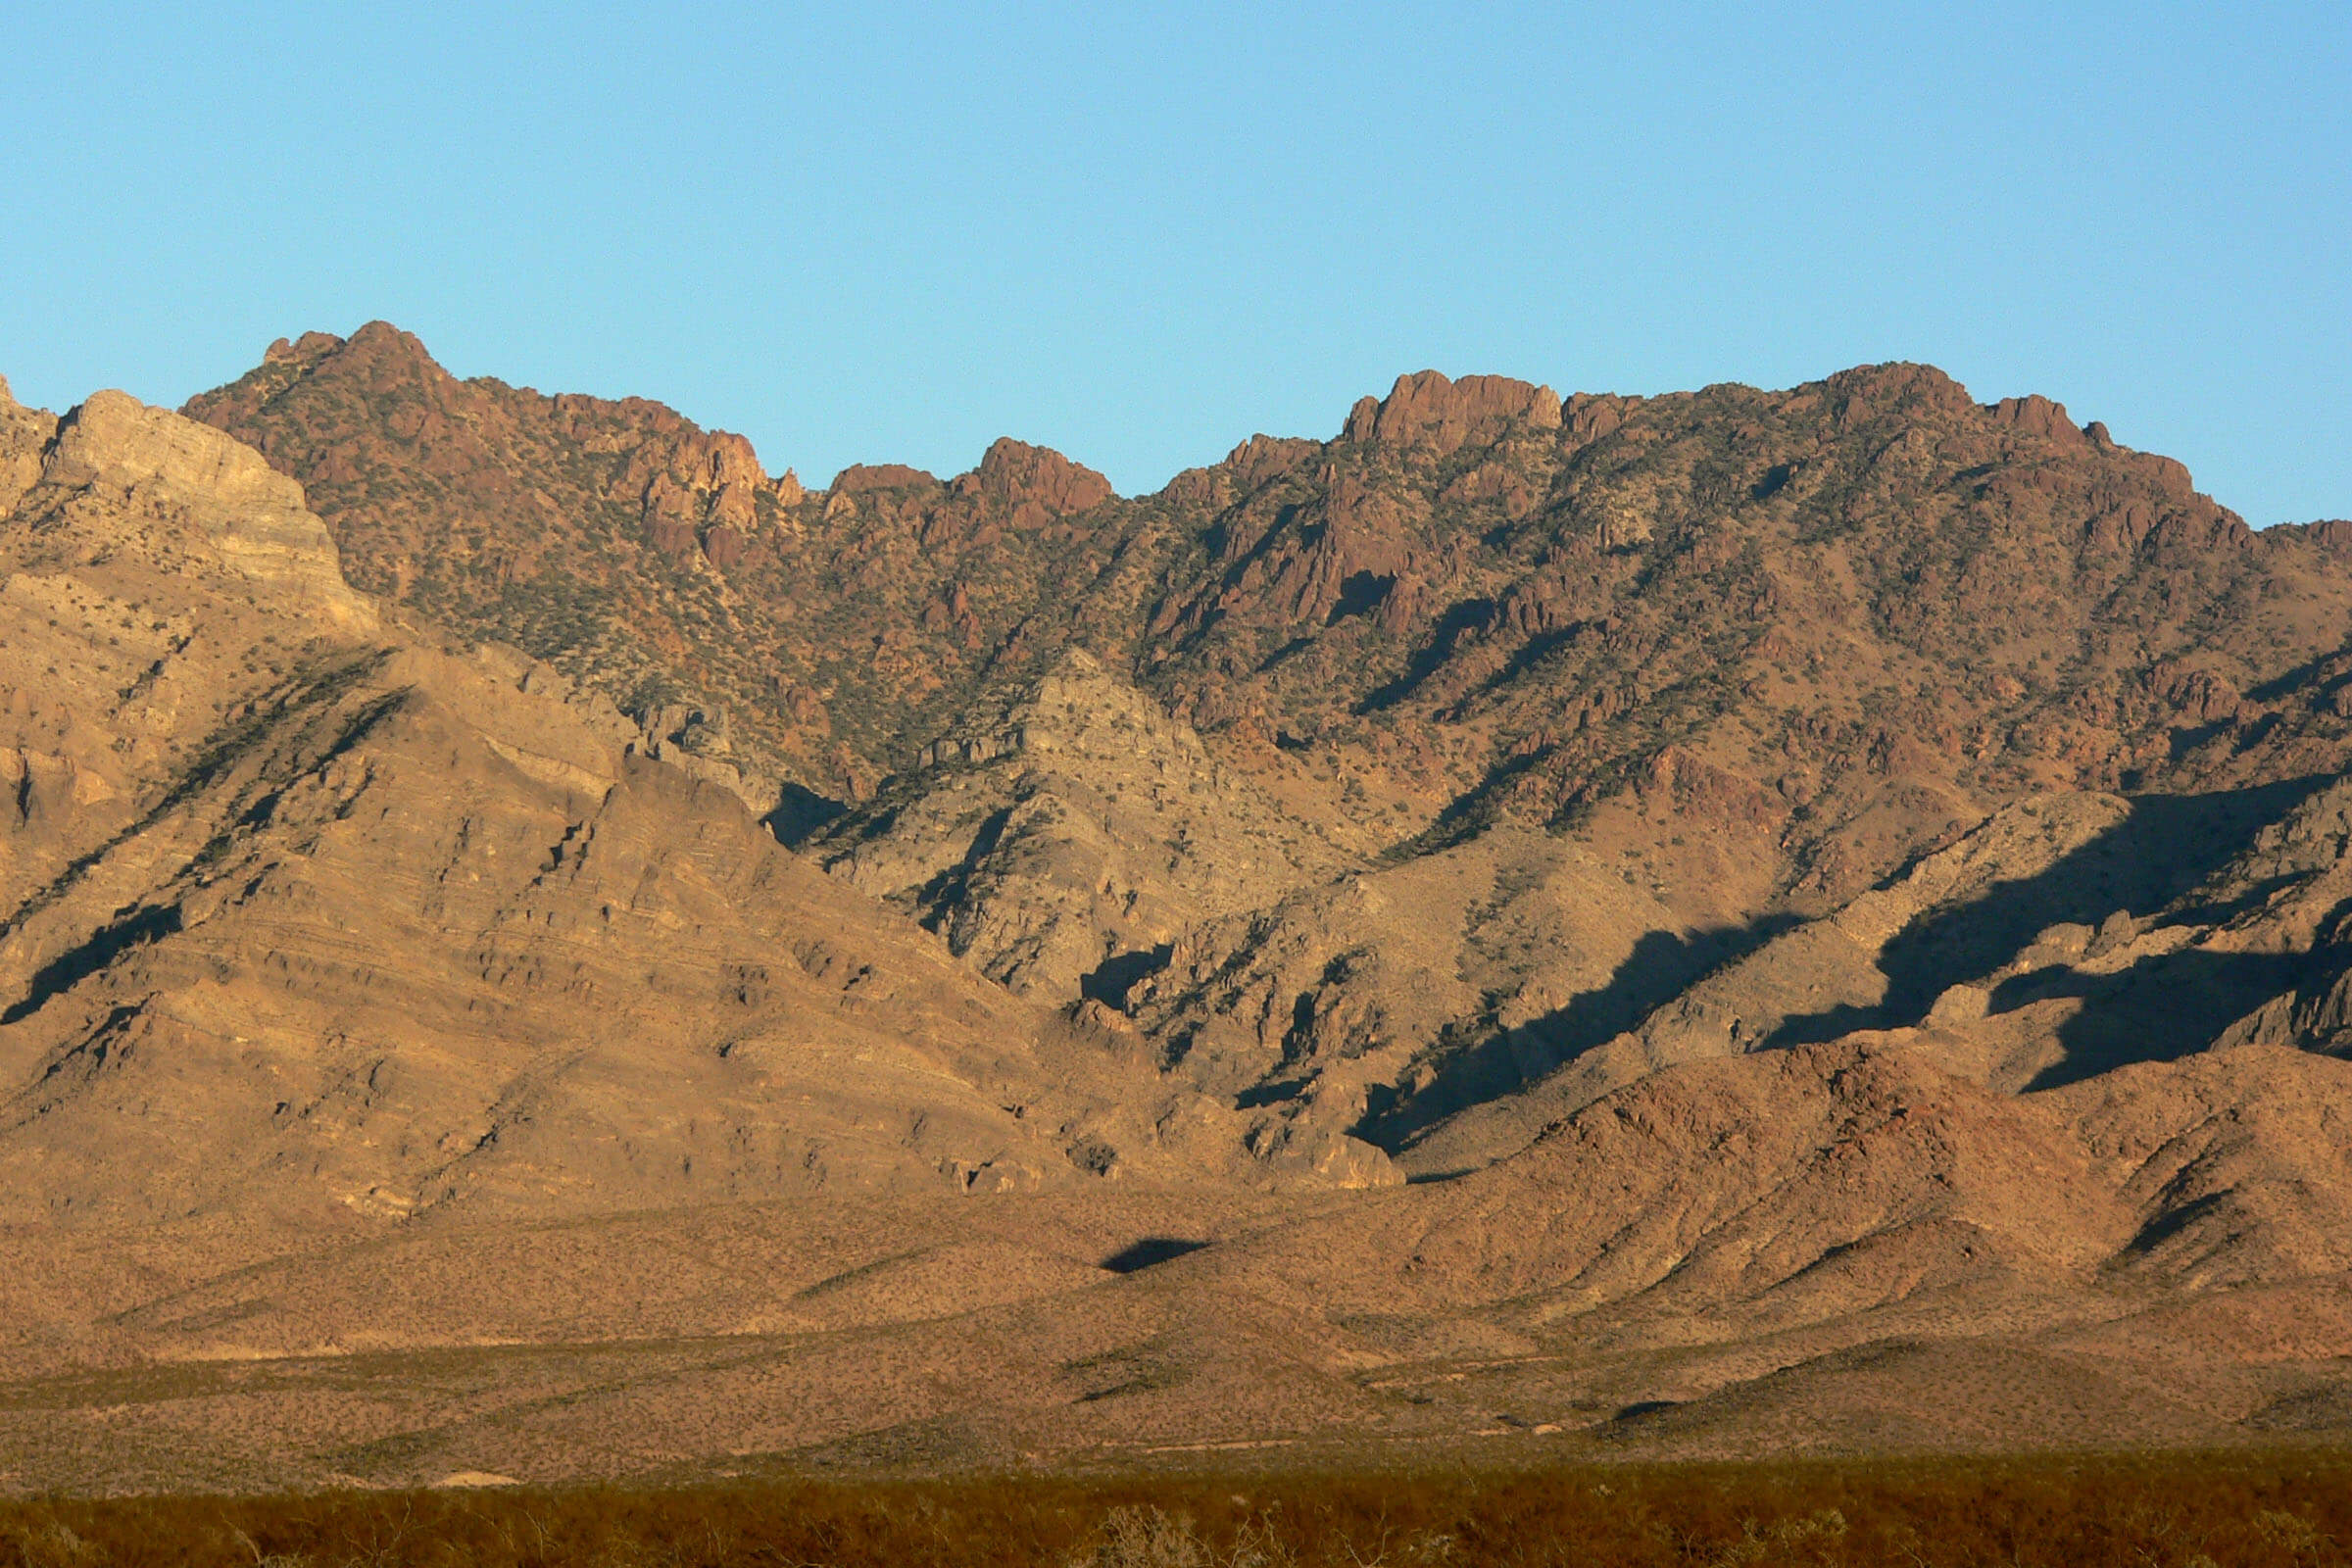 The Providence Mountains are found in the eastern Mojave Desert of San Bernardino County, California, U.S. The range reaches an elevation of 7,162 feet at Edgar Peak and is home to the Mitchell Caverns Natural Preserve.